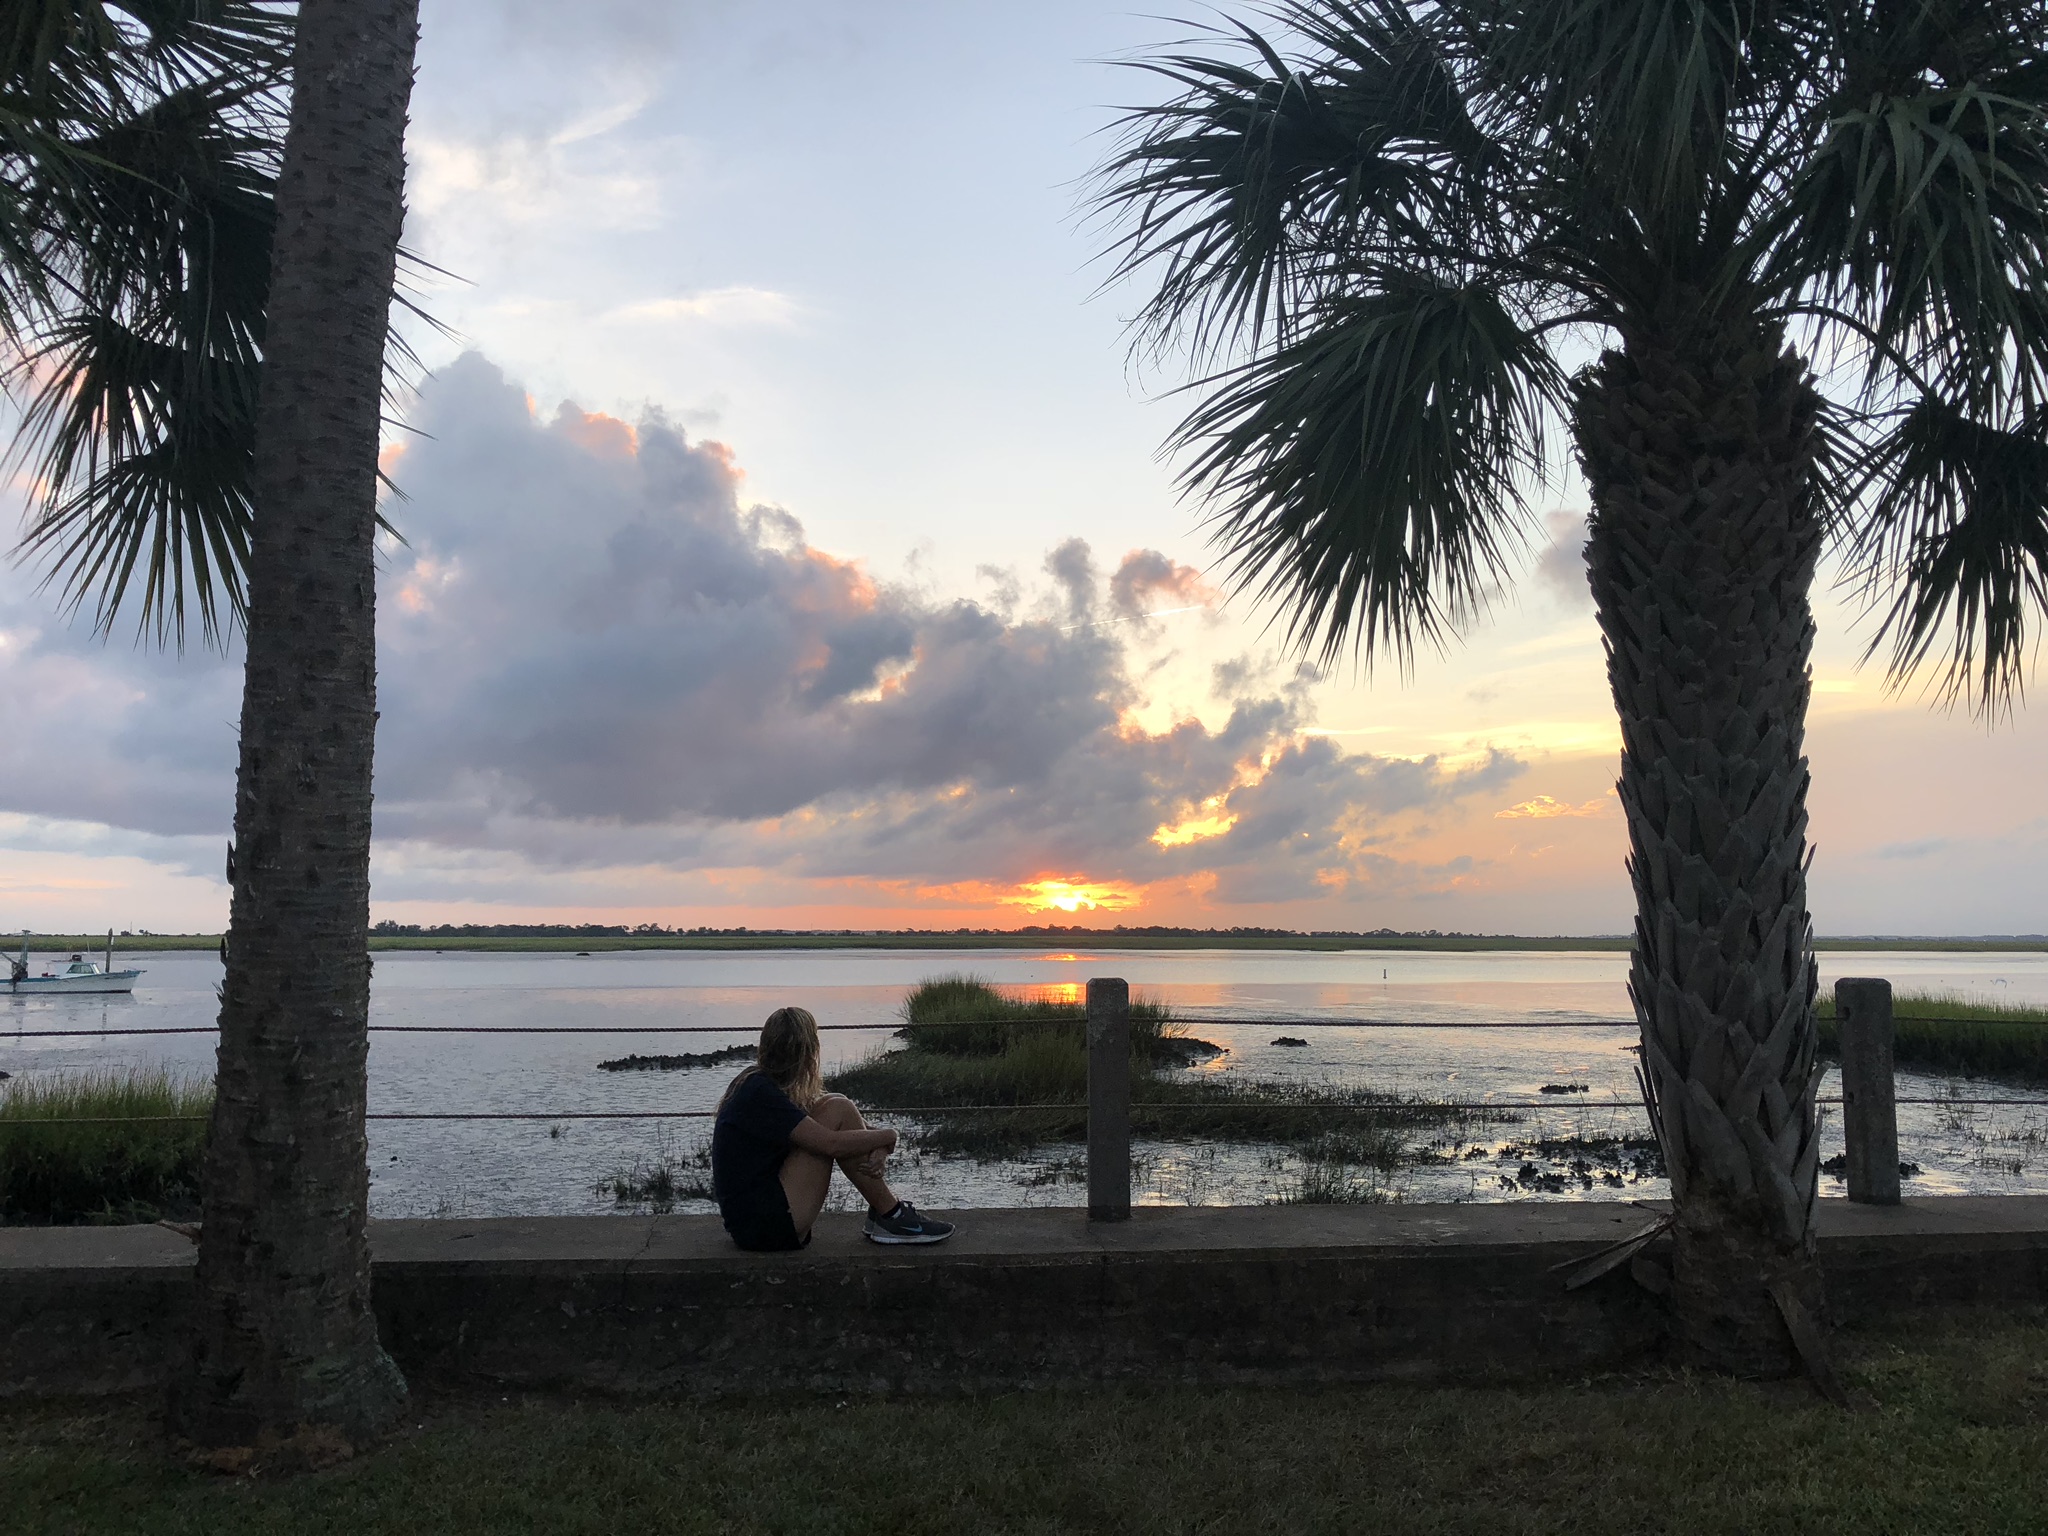 Jekyll Island Club Resort The Complete Guide Amber Likes